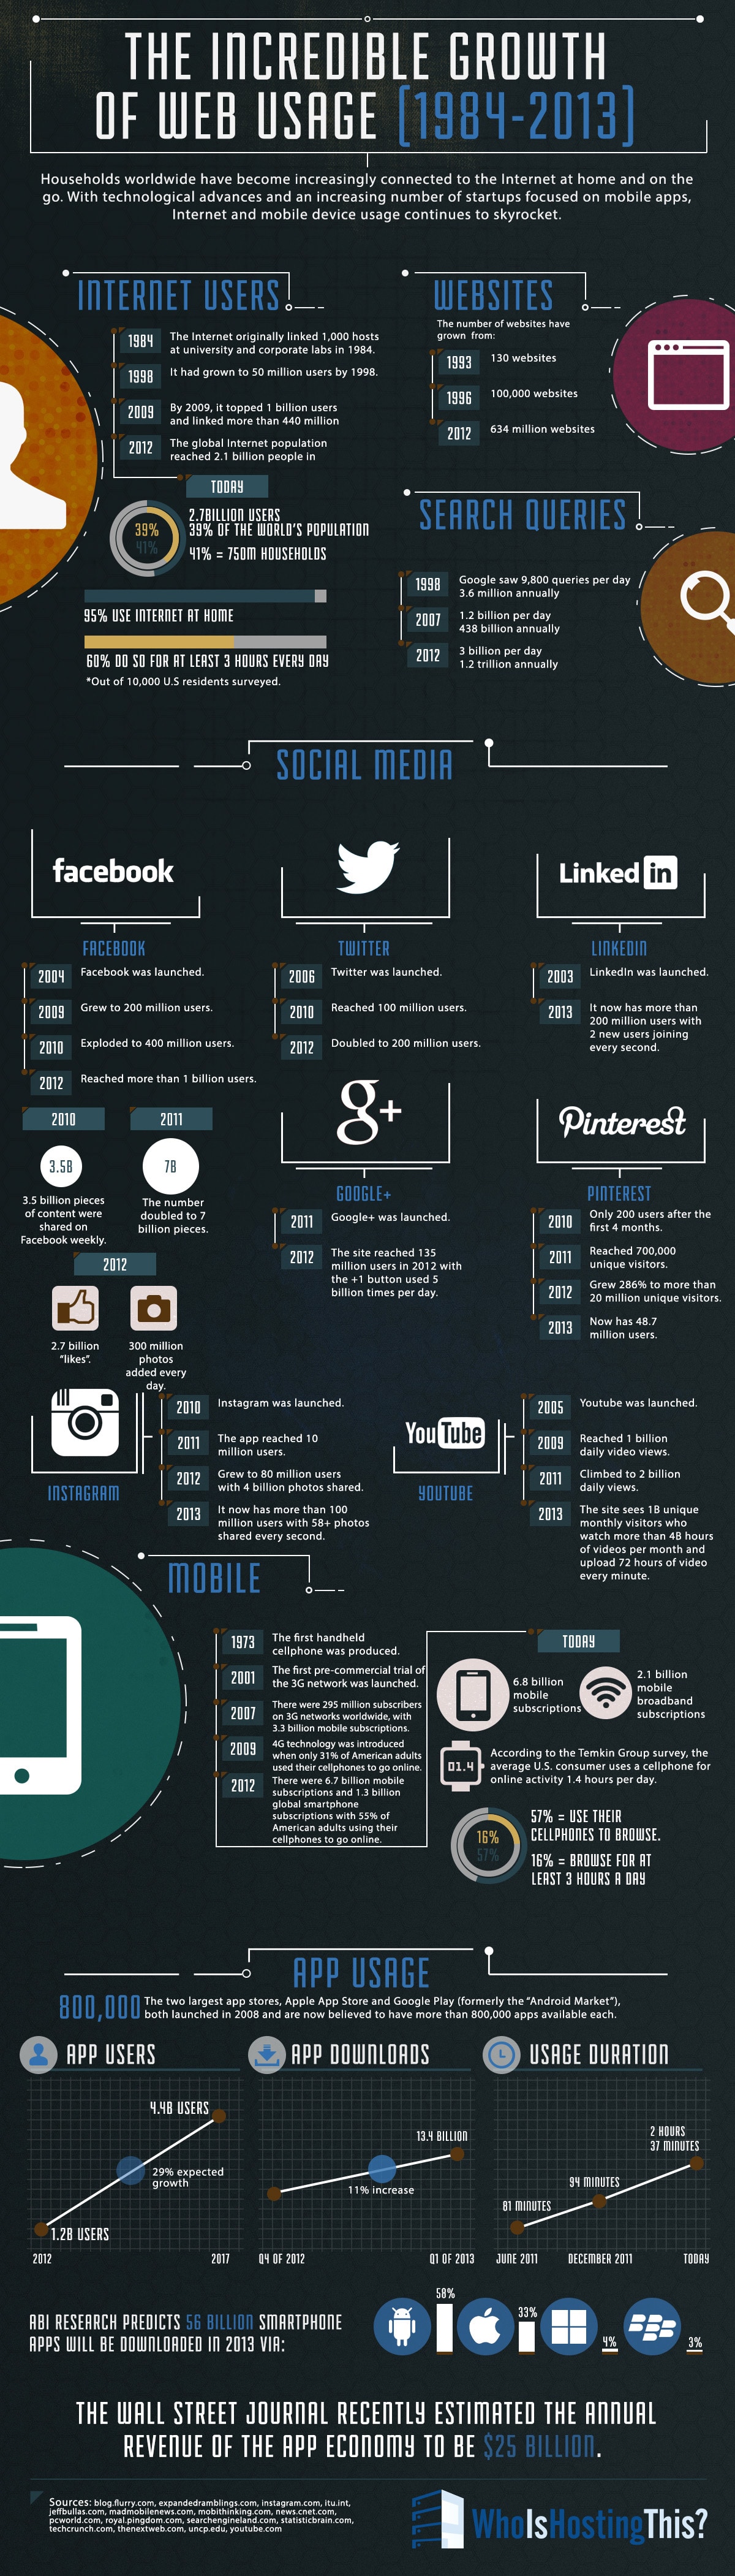 Mind-Boggling Internet Growth From 1984 – 2013 [Infographic]